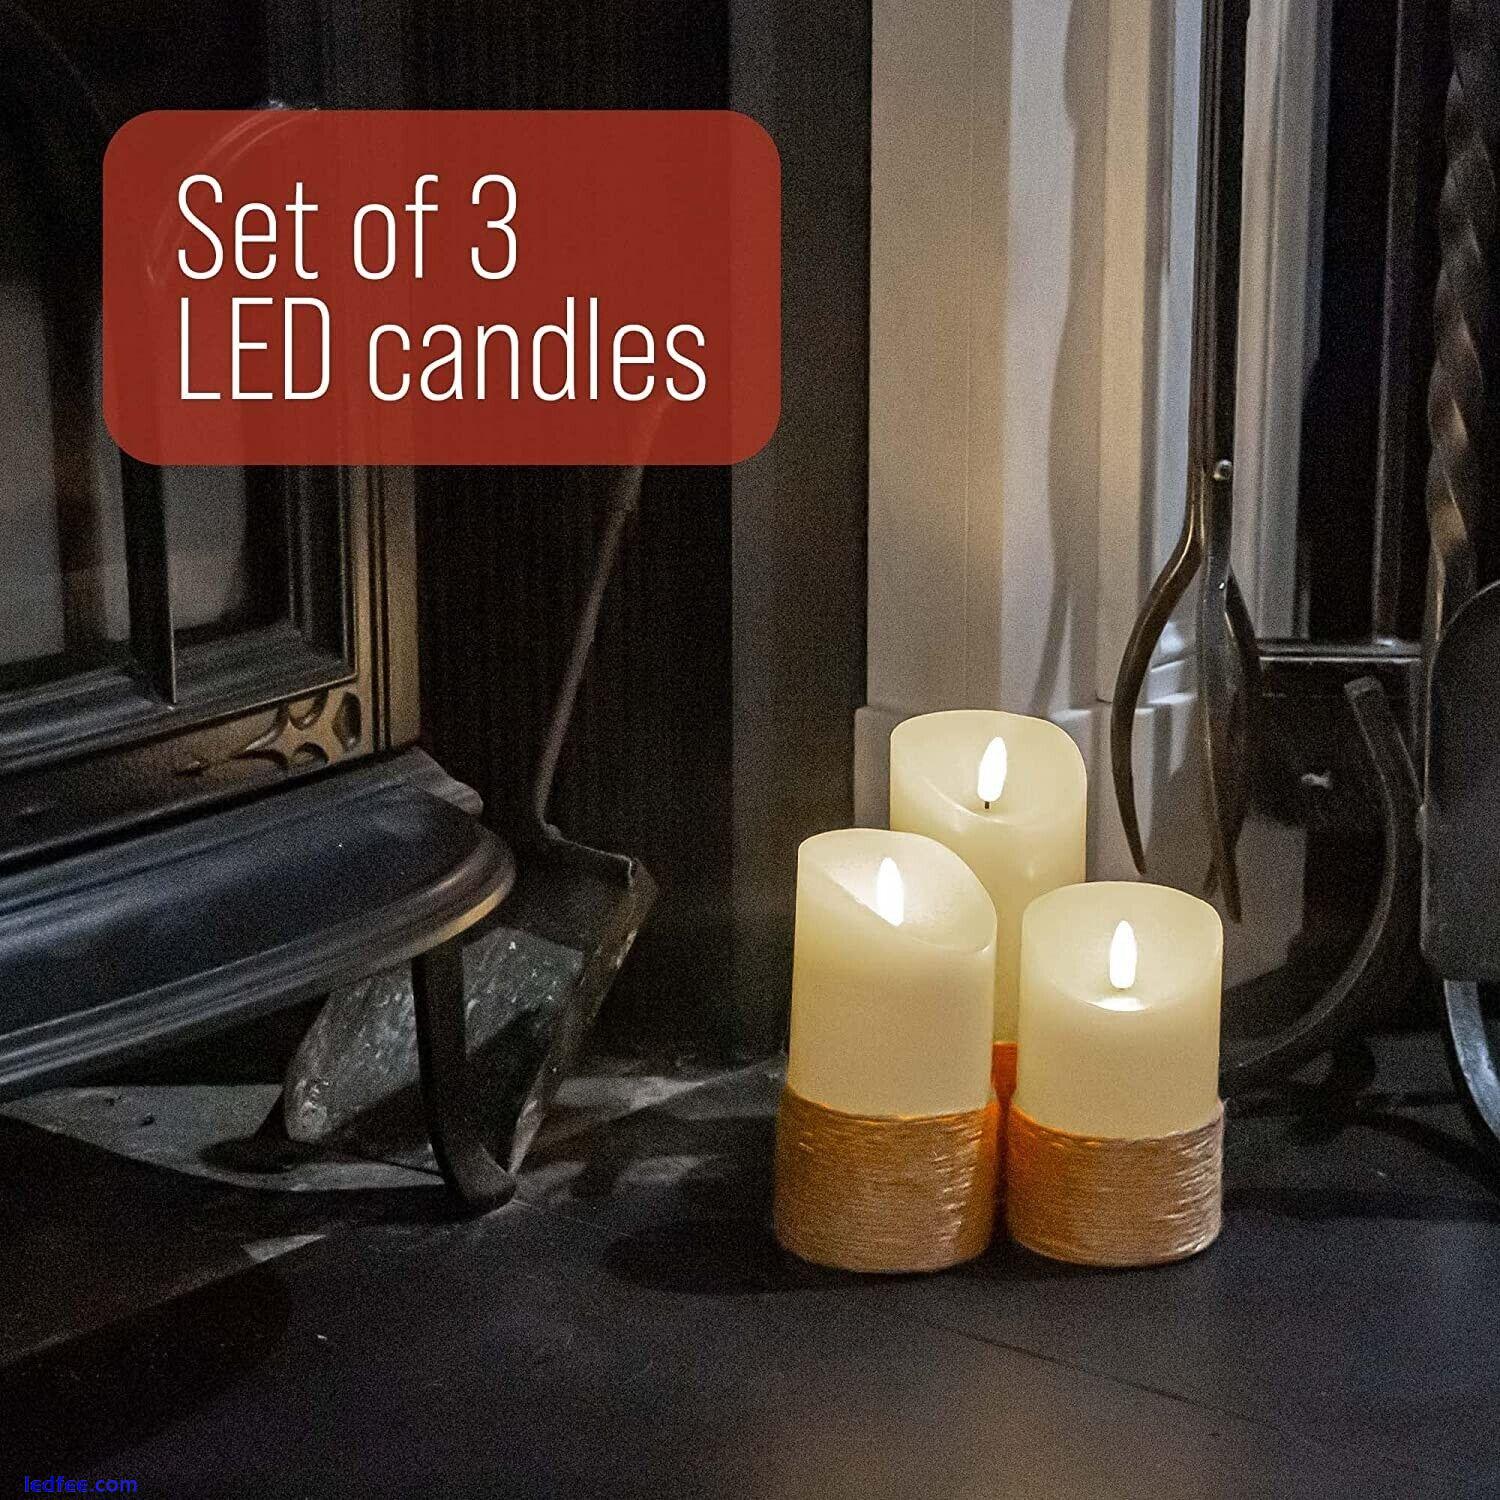  LED Candles Flickering with Rope Design LED Flame Candle with Remote (Set of 3) 2 